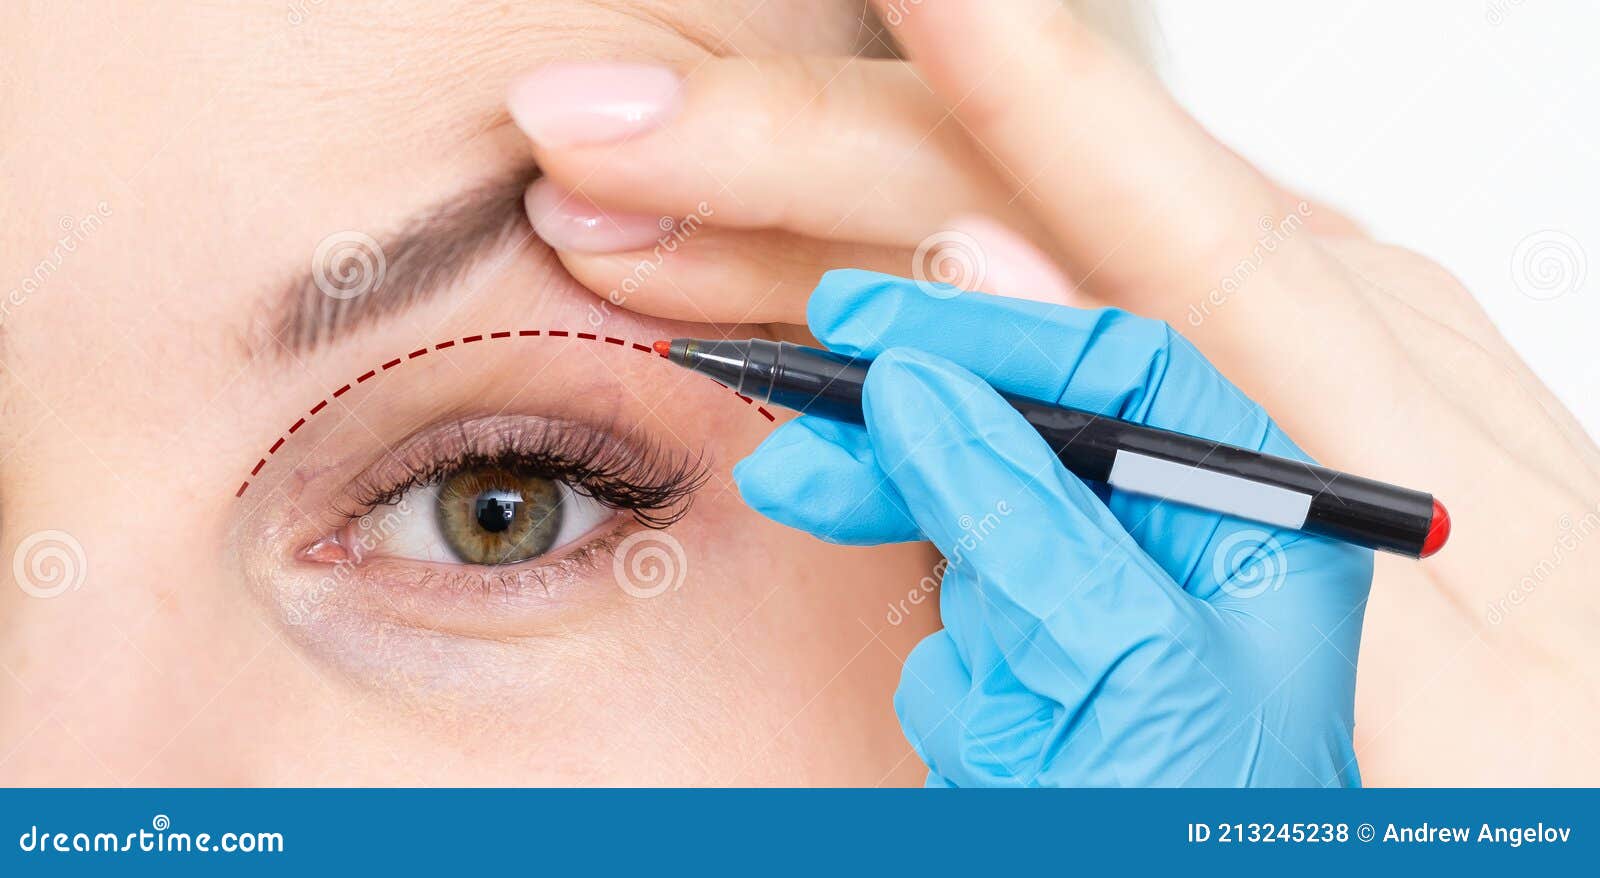 woman shows drooping eyelid for plastic surgery. doctor plastic surgeon marks with a felt-tip pen a marker for a